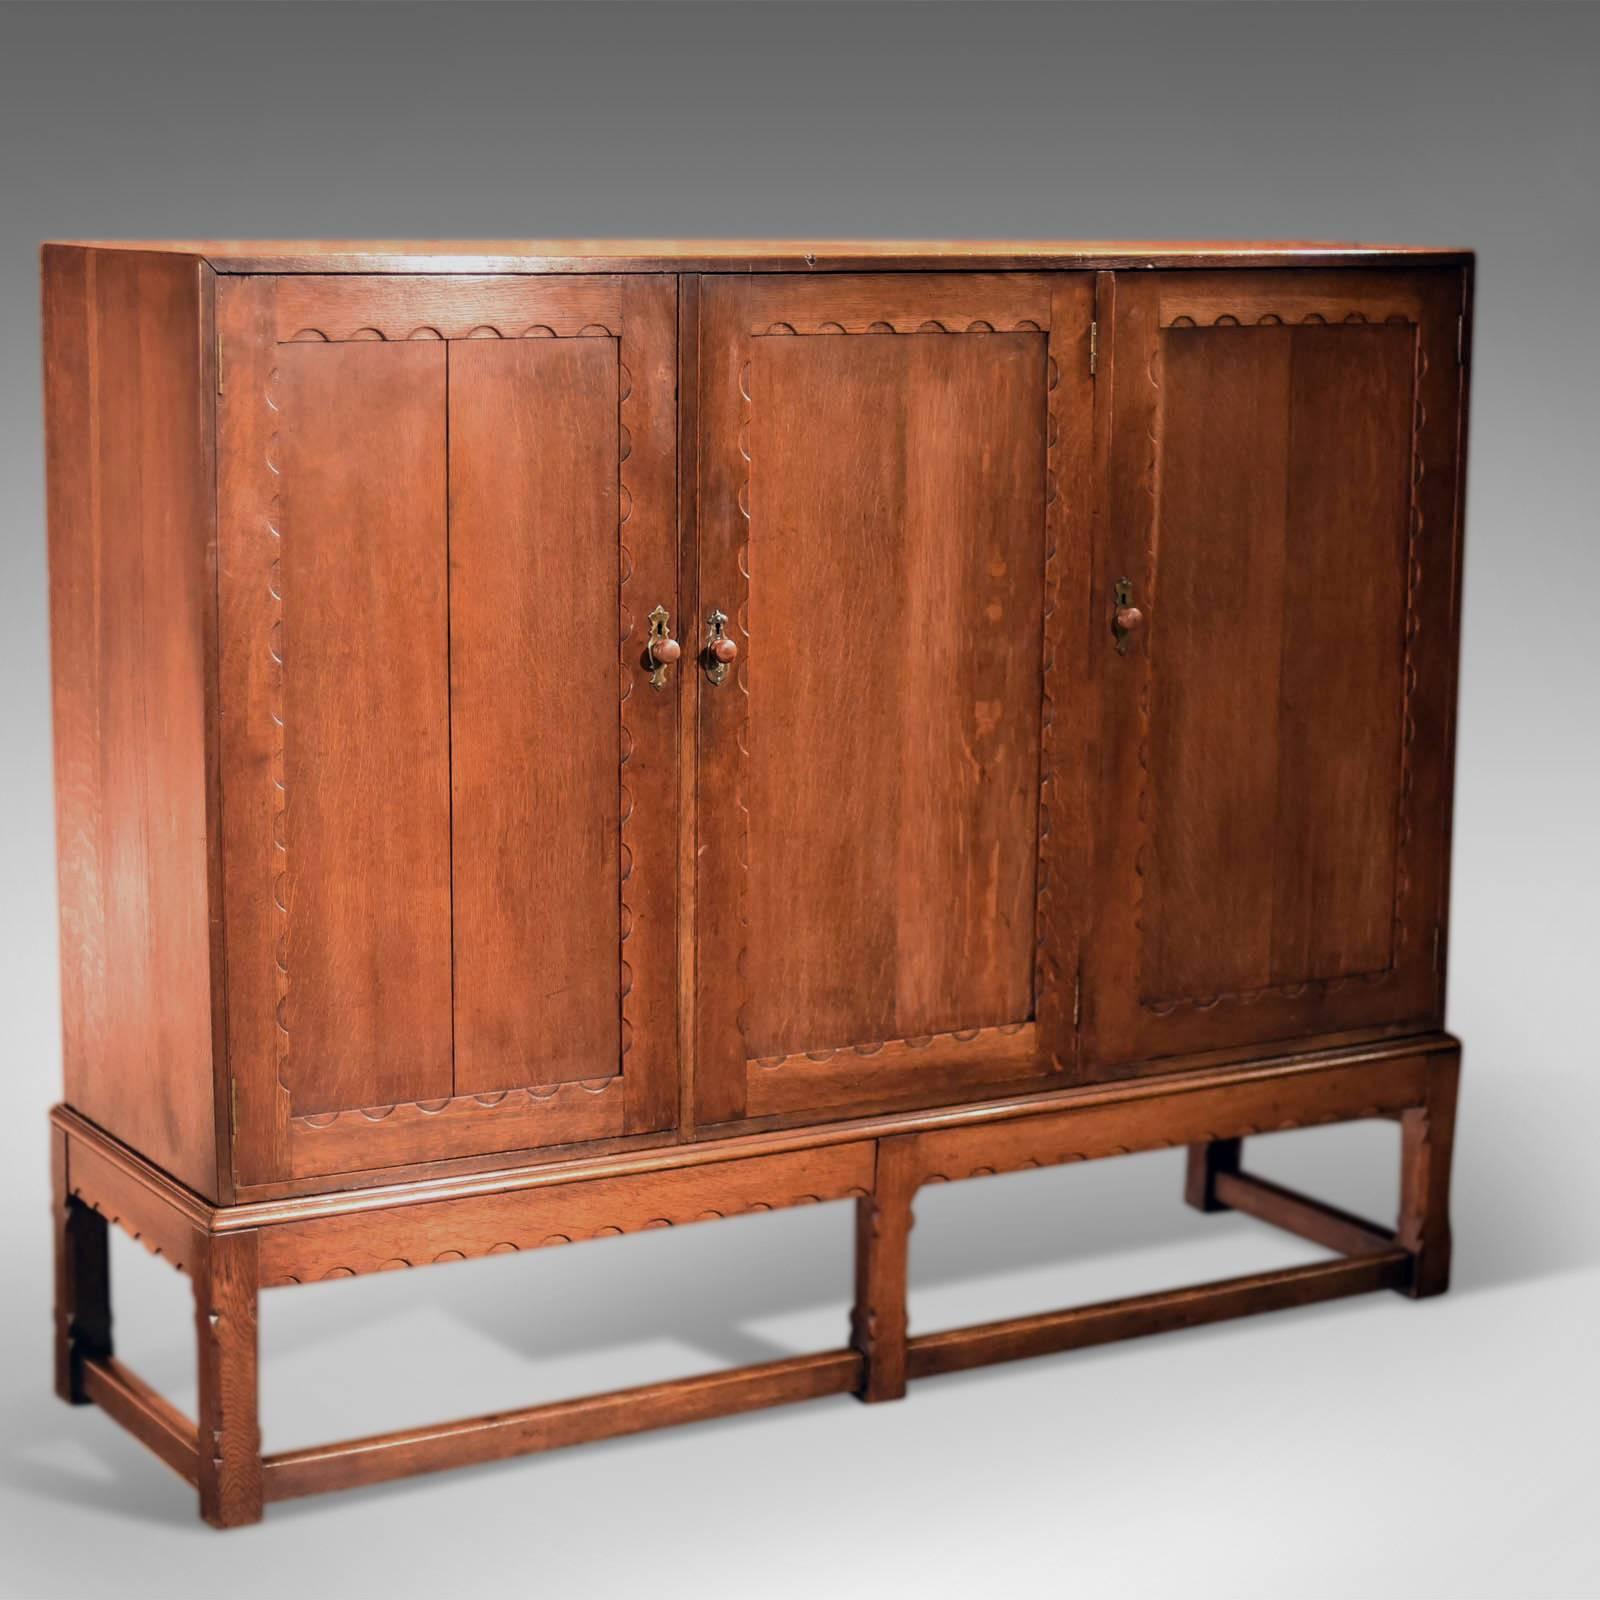 This is an antique, English, Victorian oak larder on stand dating to circa 1900.

In Classic Arts & Crafts styling and of Liberty quality this oak cabinet displays beautifully with medullary rays and a fine waxed finish. A substantial piece of